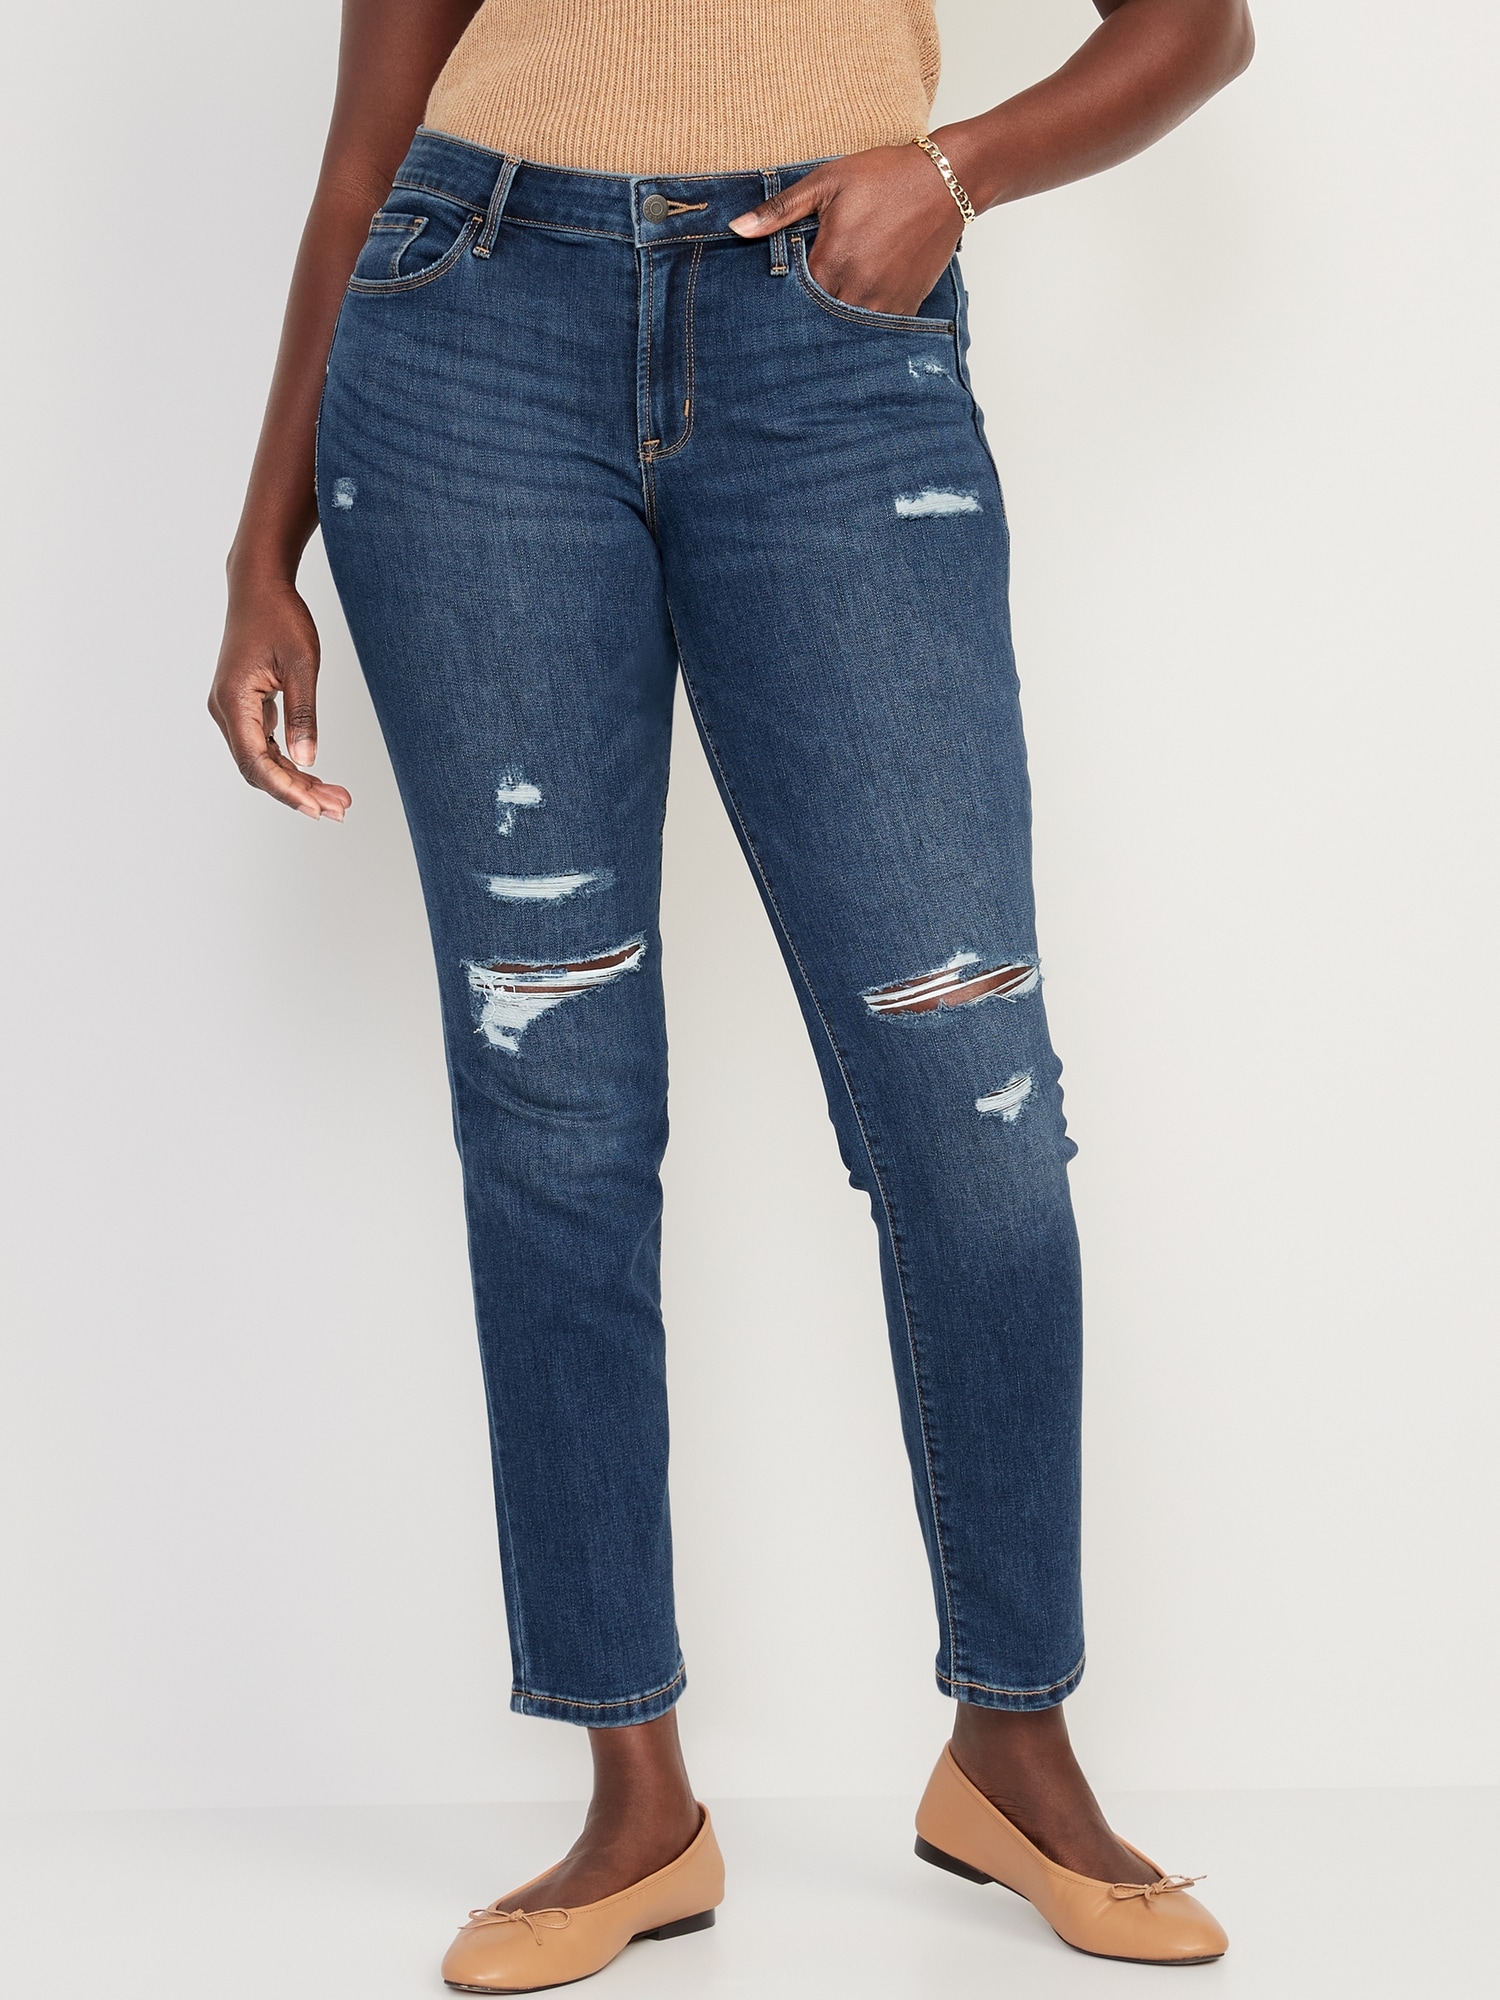 Distressed Low-Rise Slim Straight Jeans